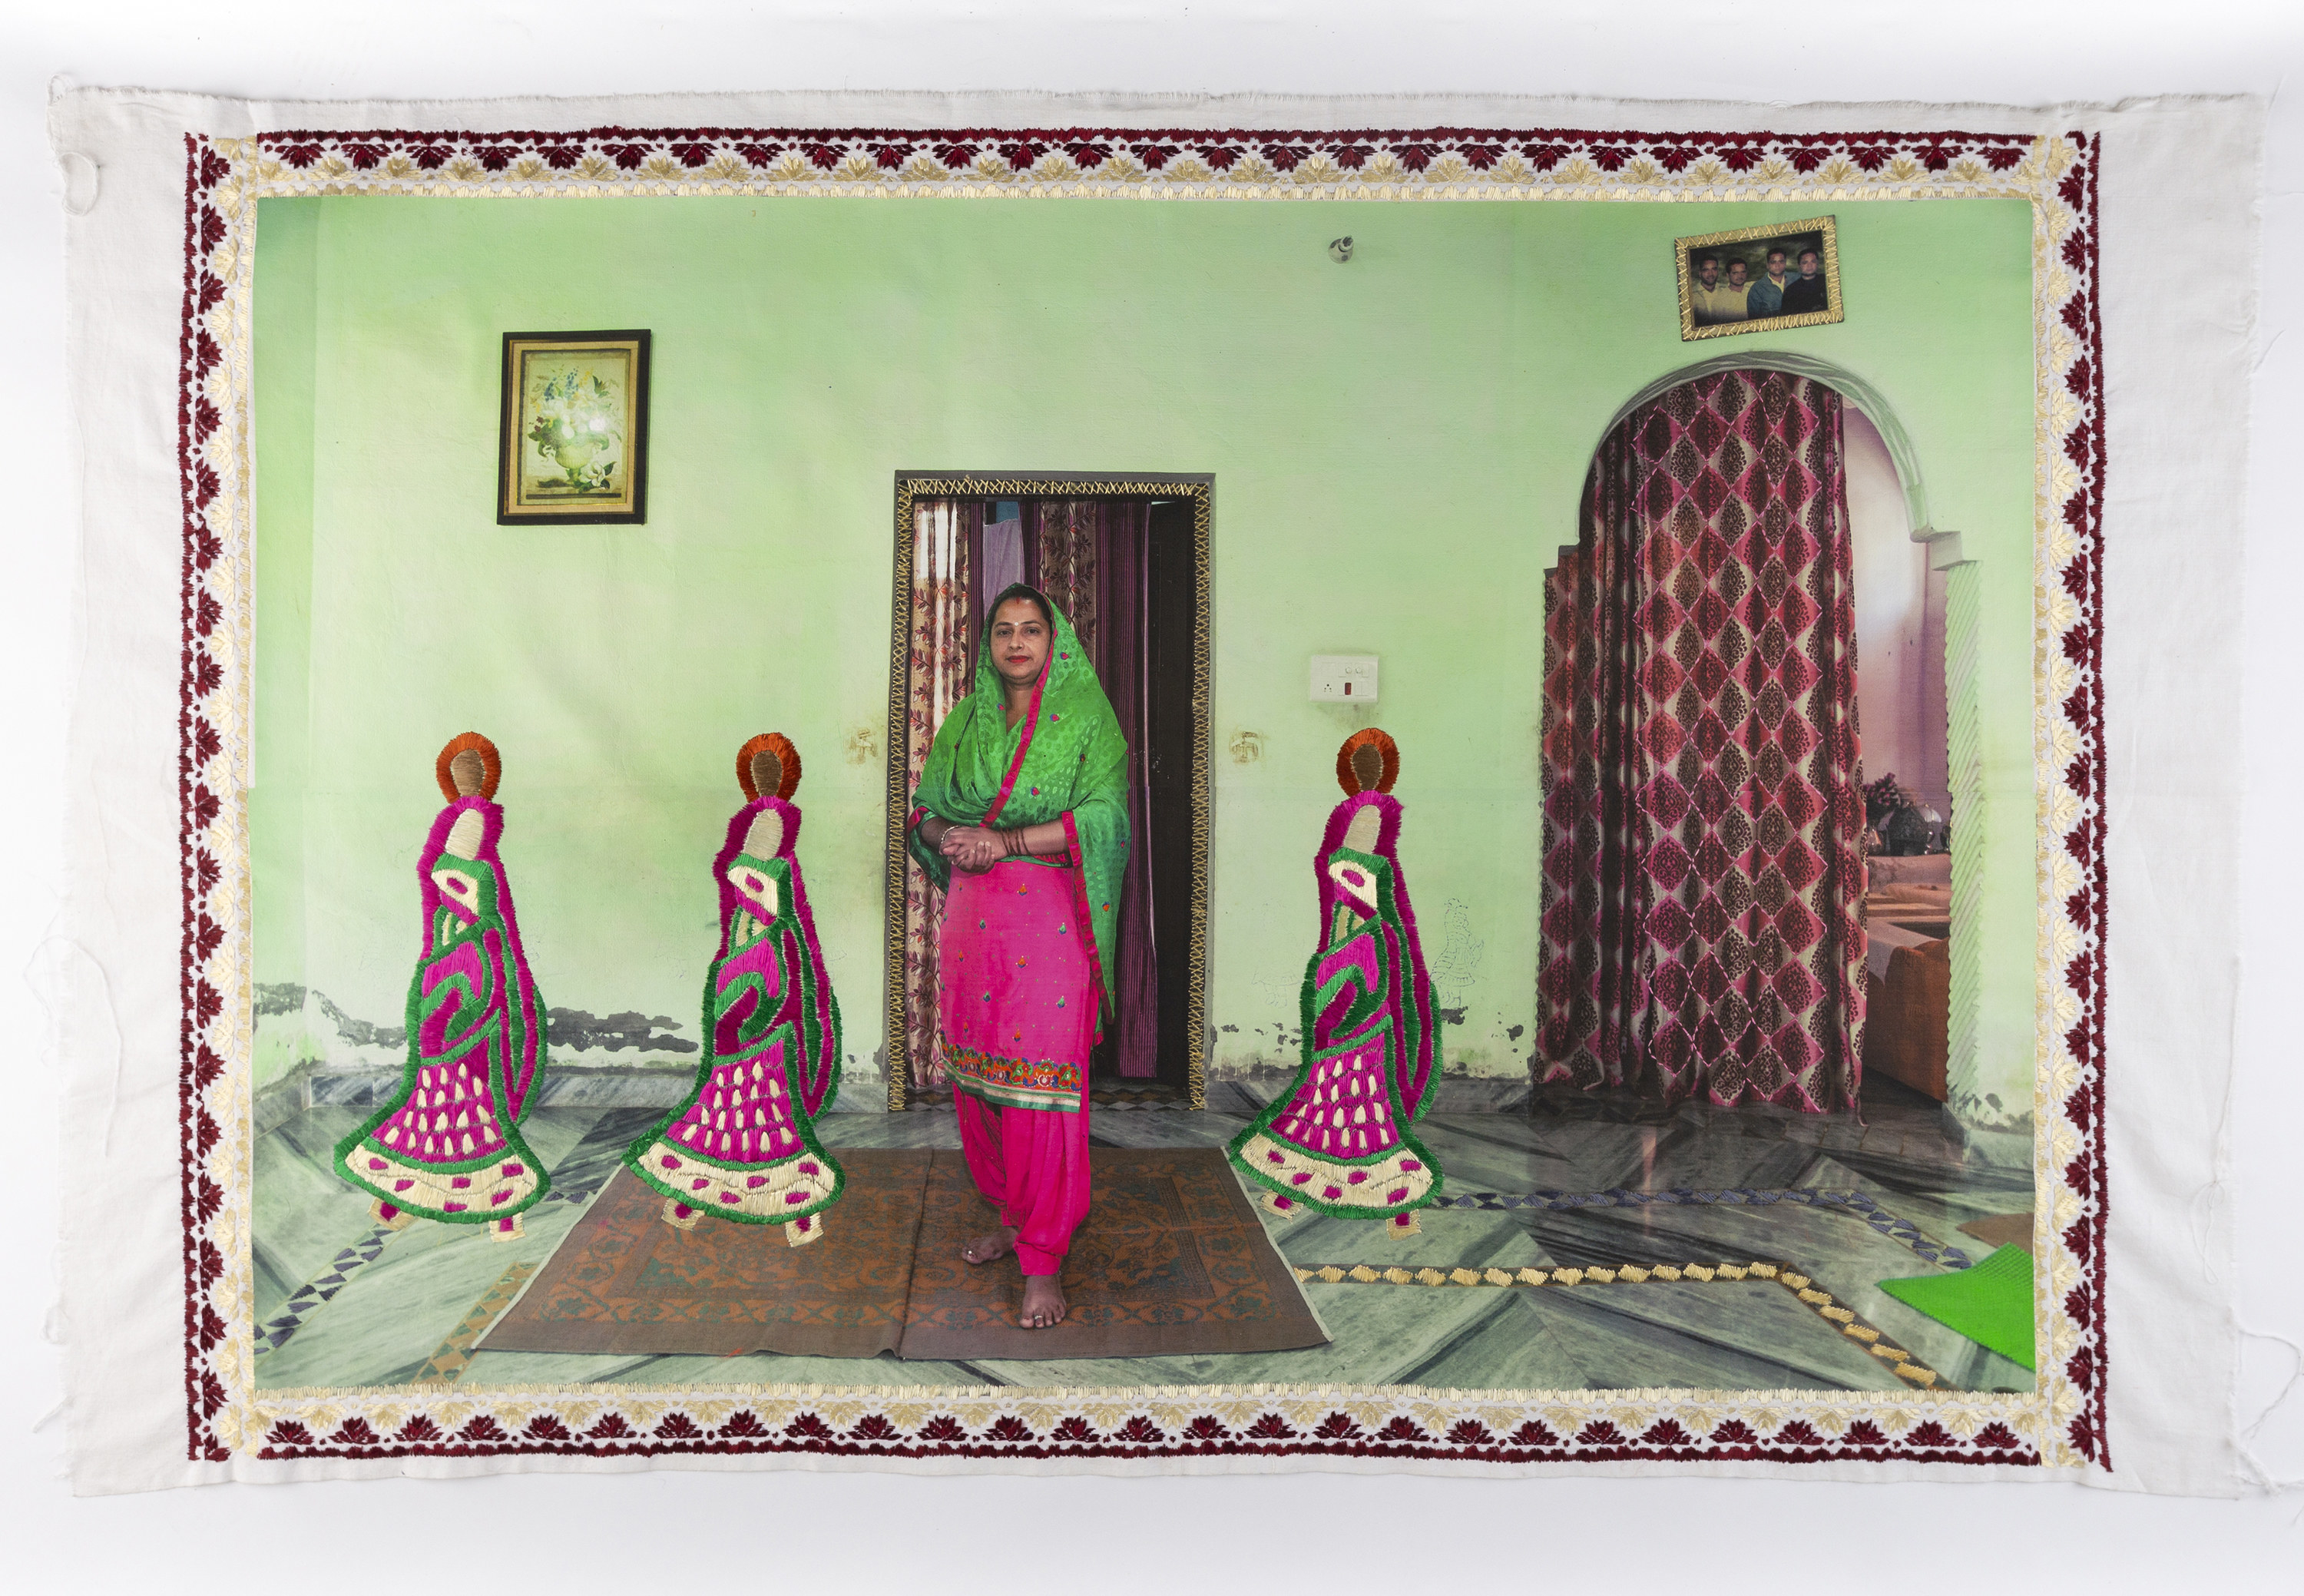 A woman stands in a room with two doorways, next to her three small figures are embroidered 